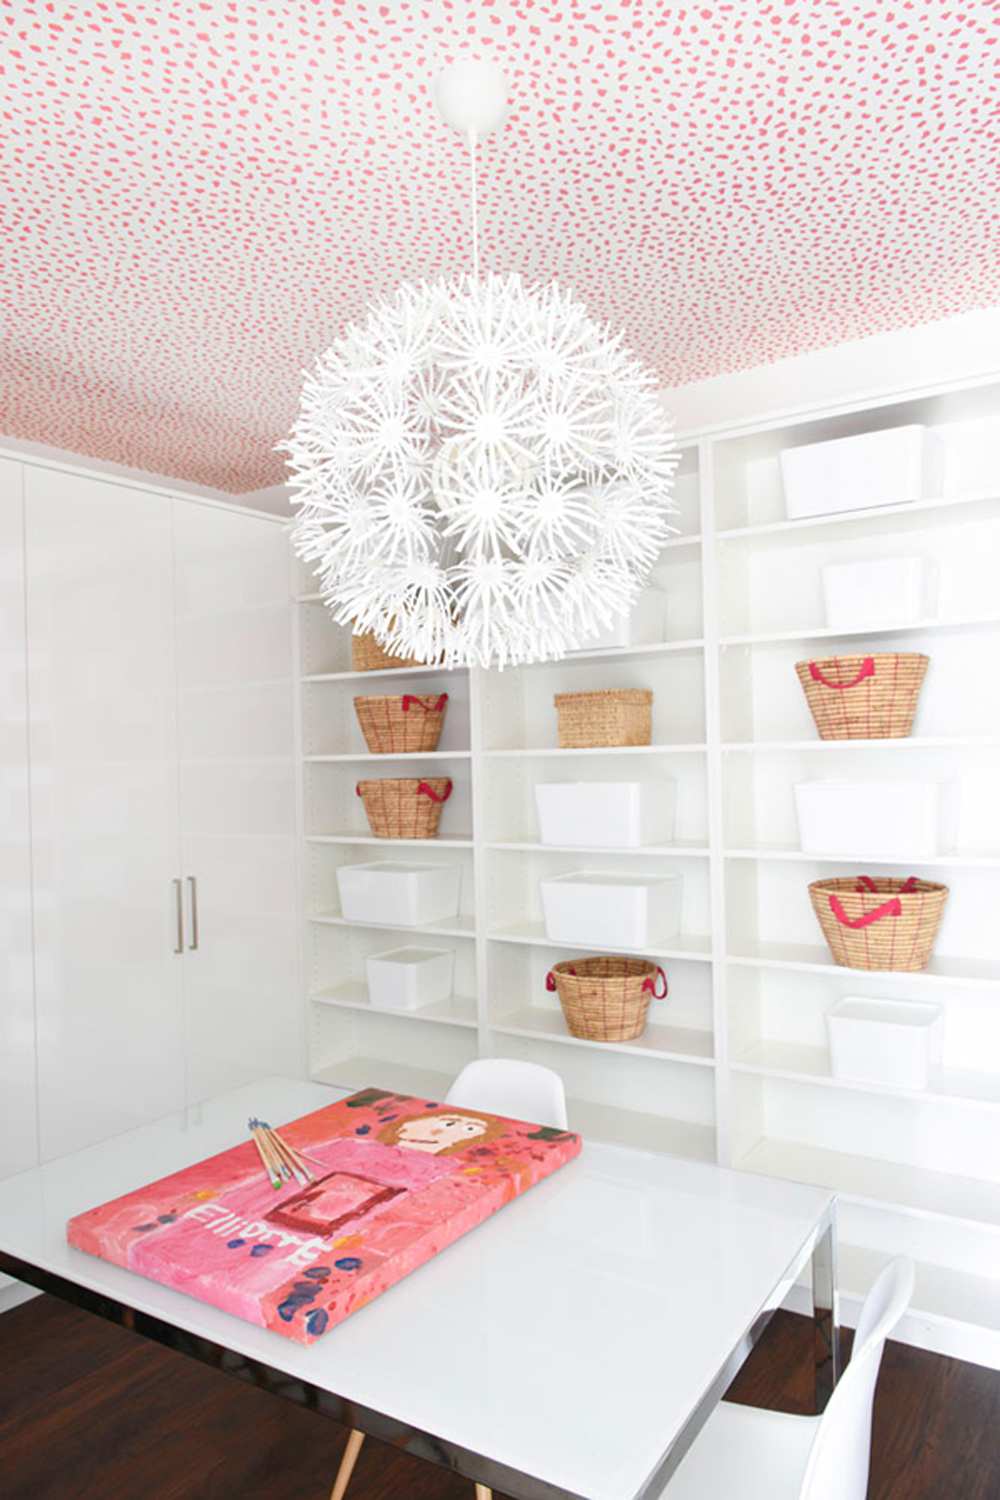 A pink and white kids' craft room with a pink polka dot wallpaper on the ceiling